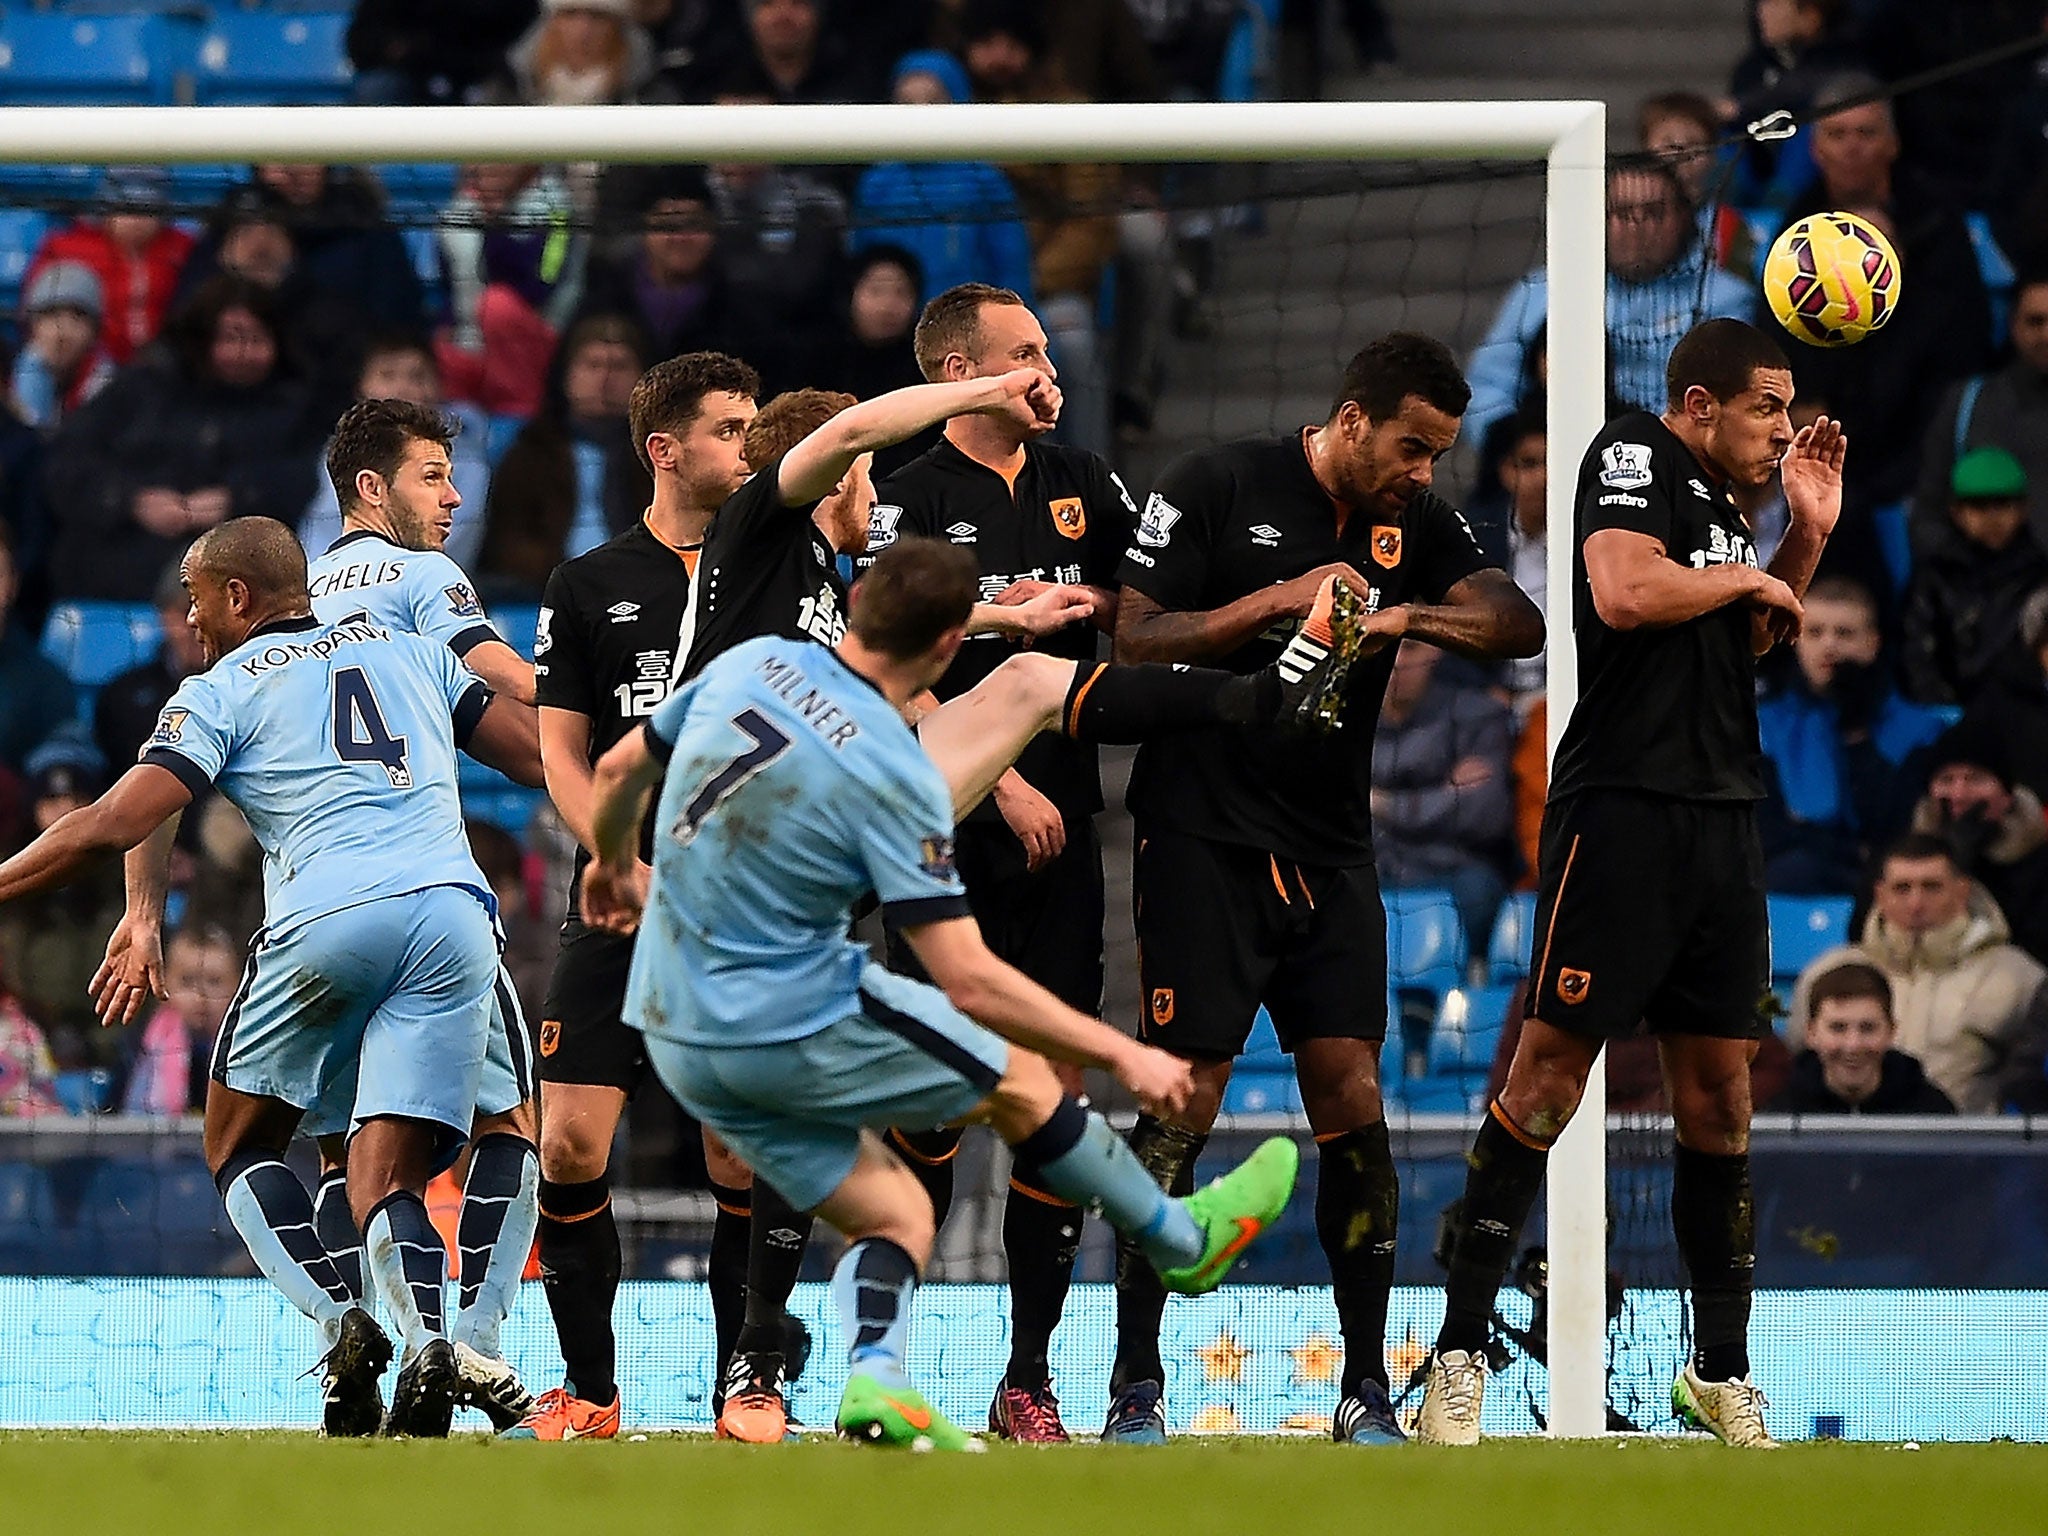 James Milner curls a free-kick in to the back of the net to salvage a 1-1 draw with Hull